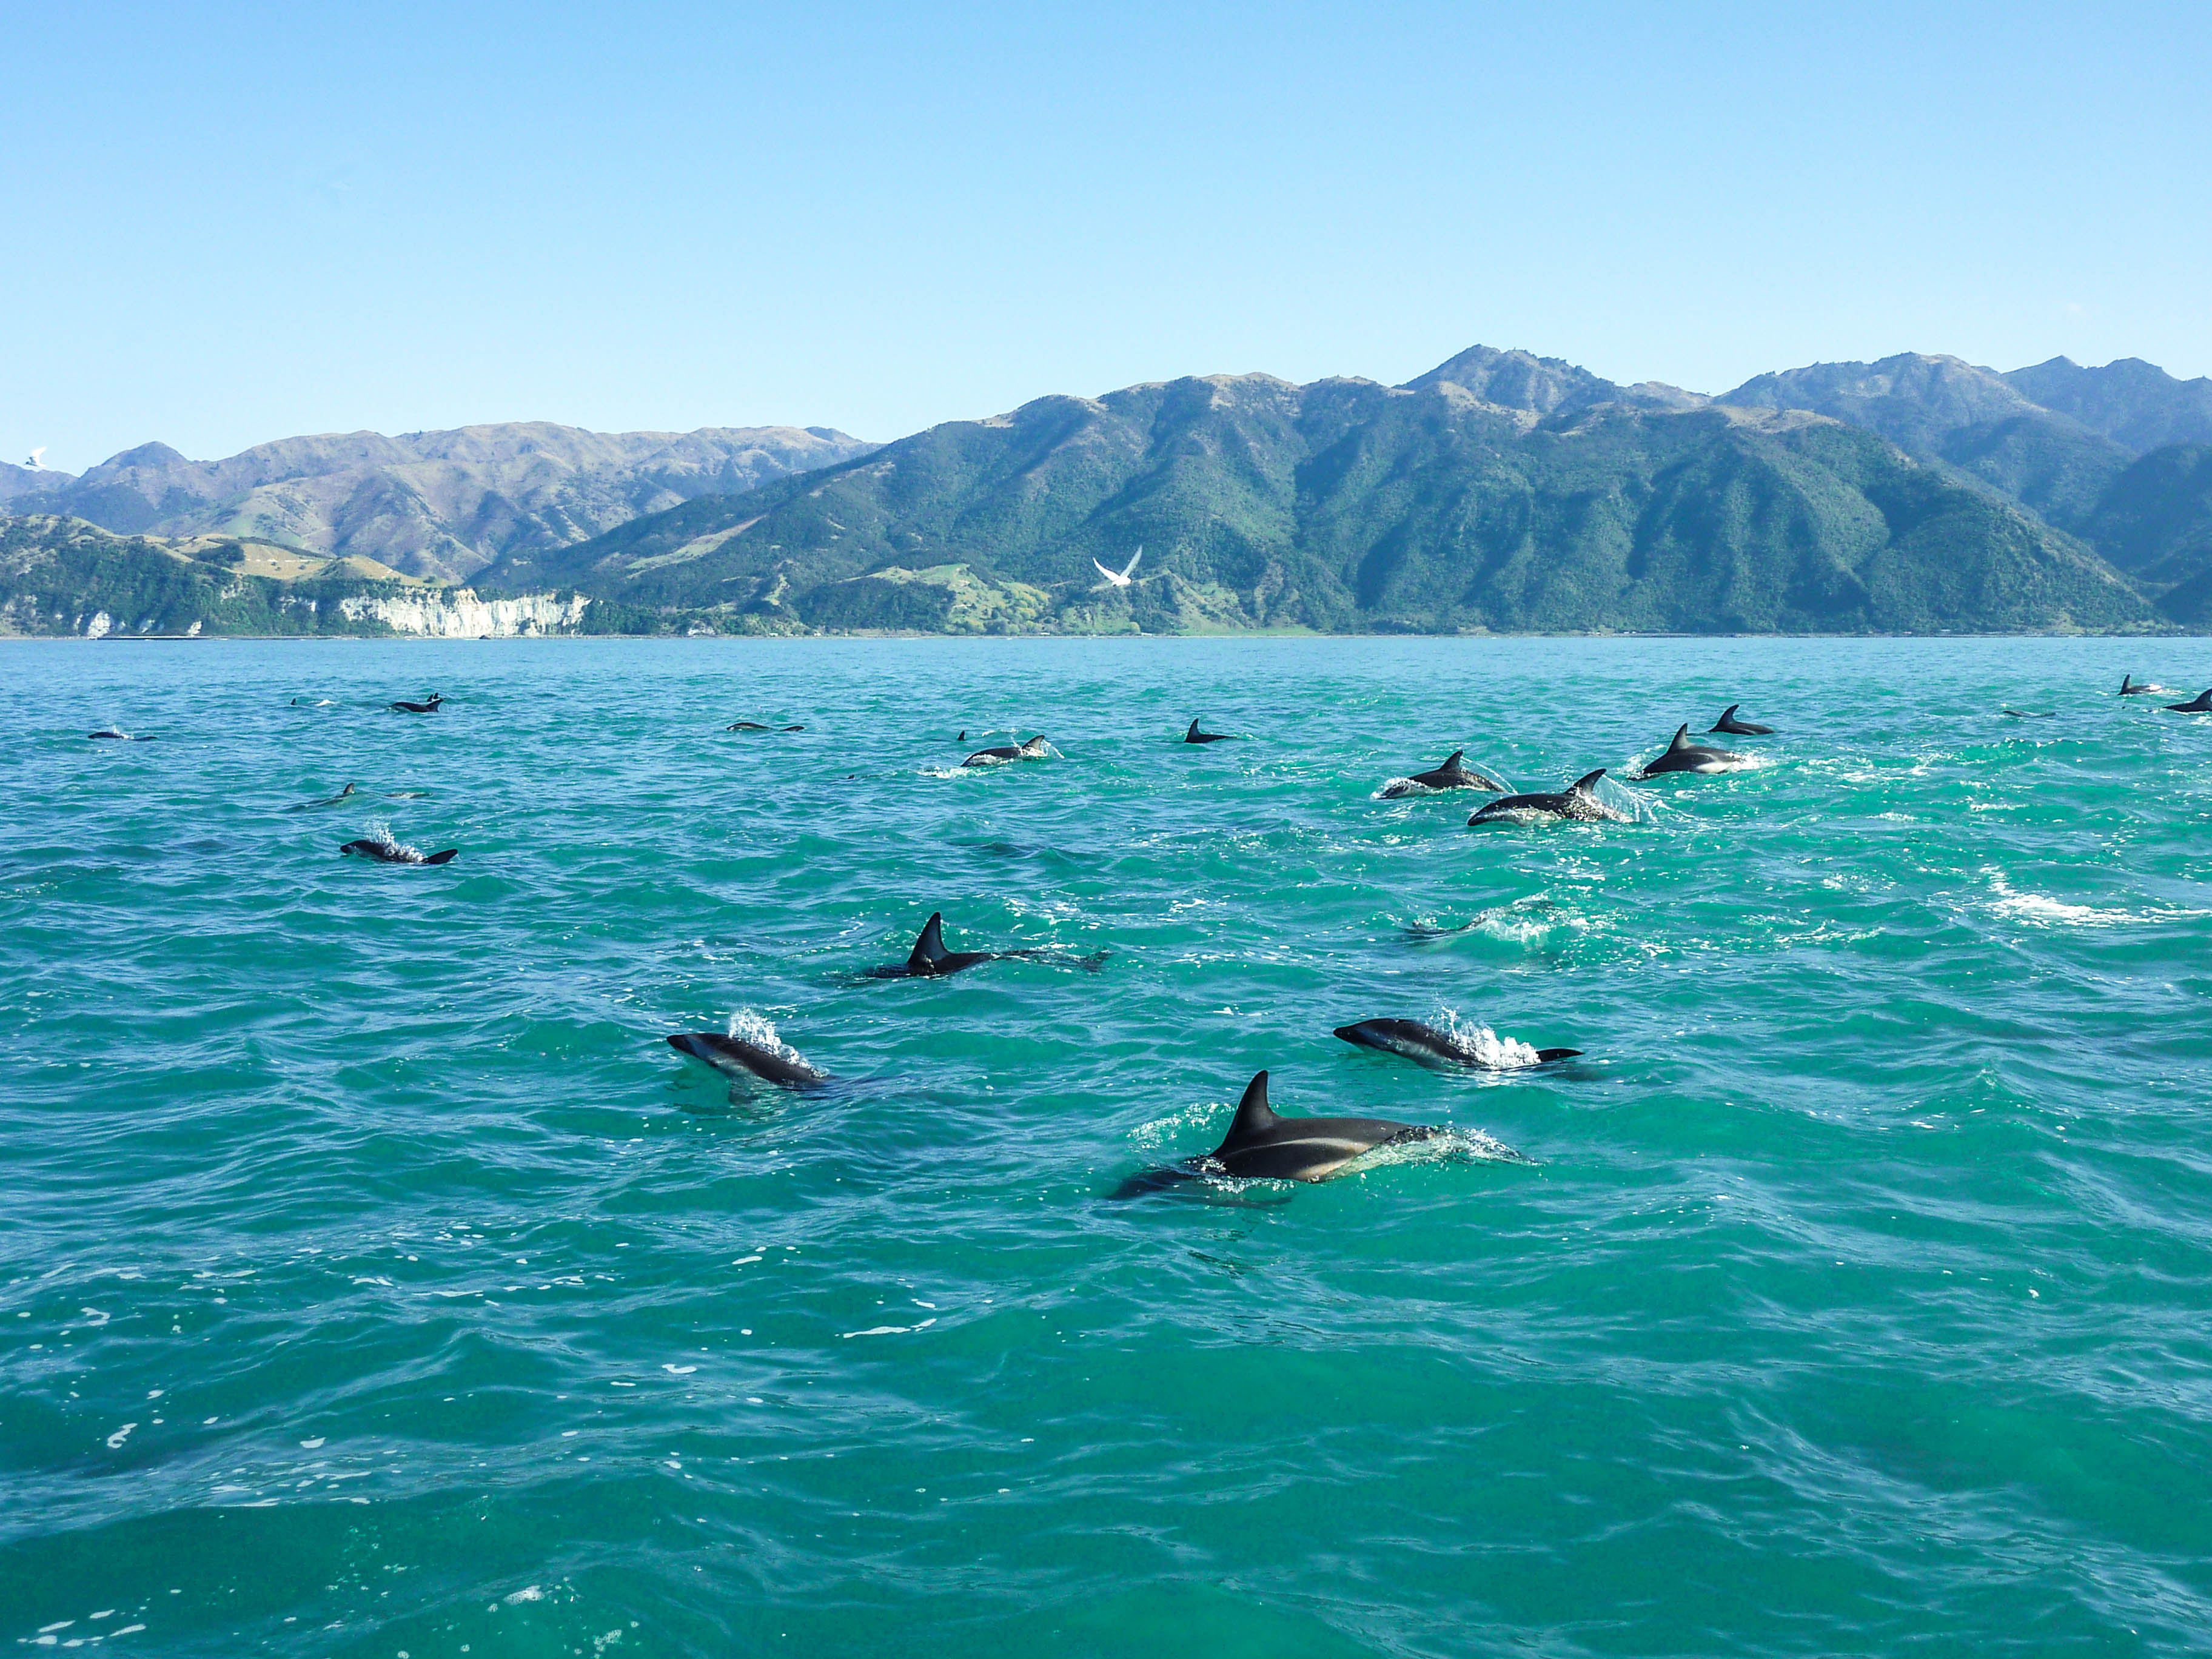 Dolphins jumping outside Kaikoura